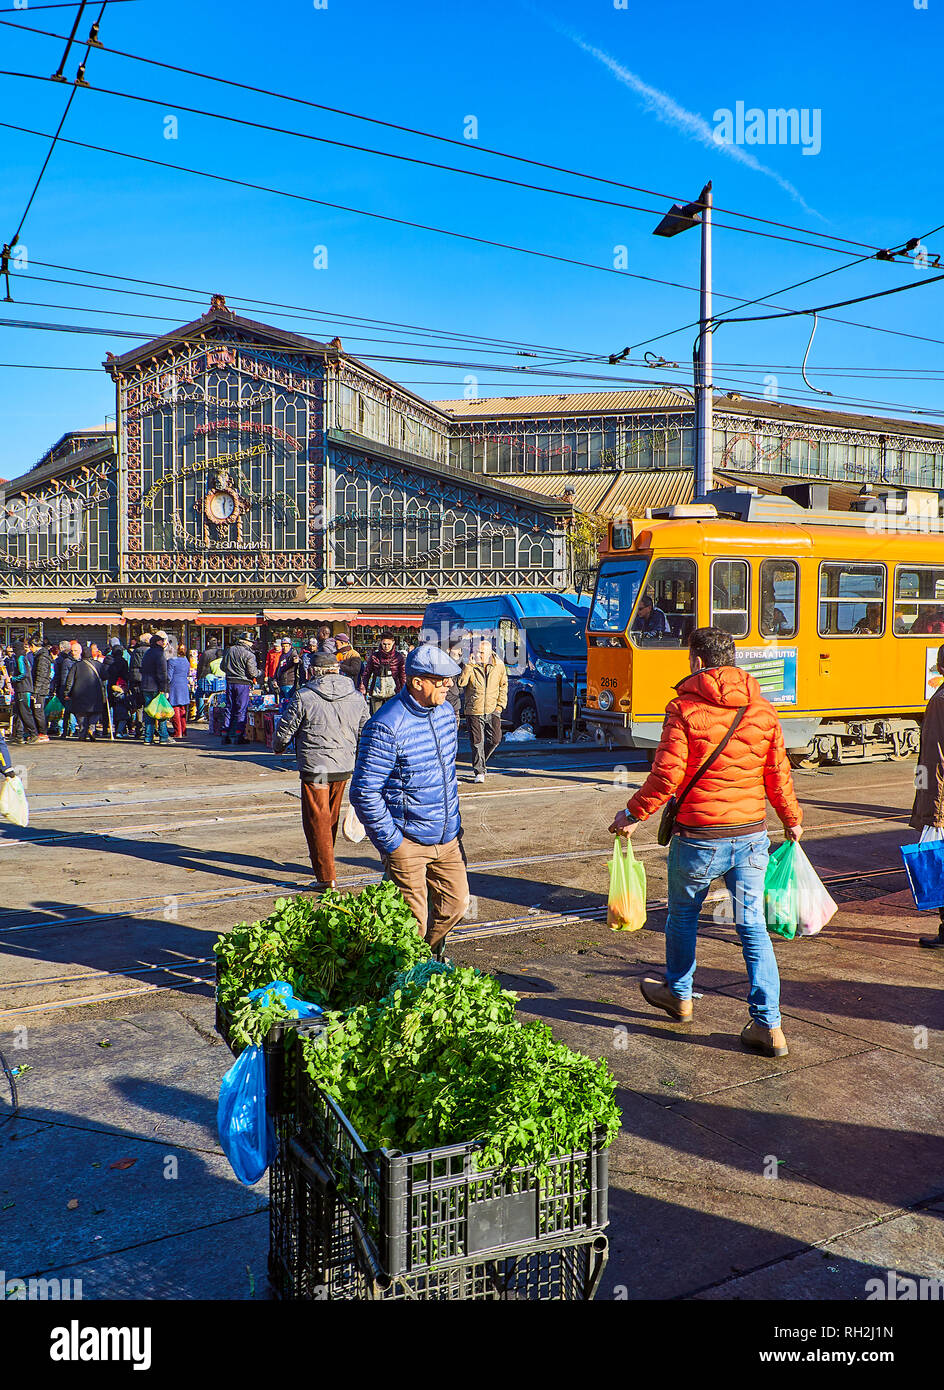 Citizens in front of the Antica Tettoia dell'Orologio building, the Fresh food part of Porta Palazzo market. Turin, Piedmont, Italy. Stock Photo